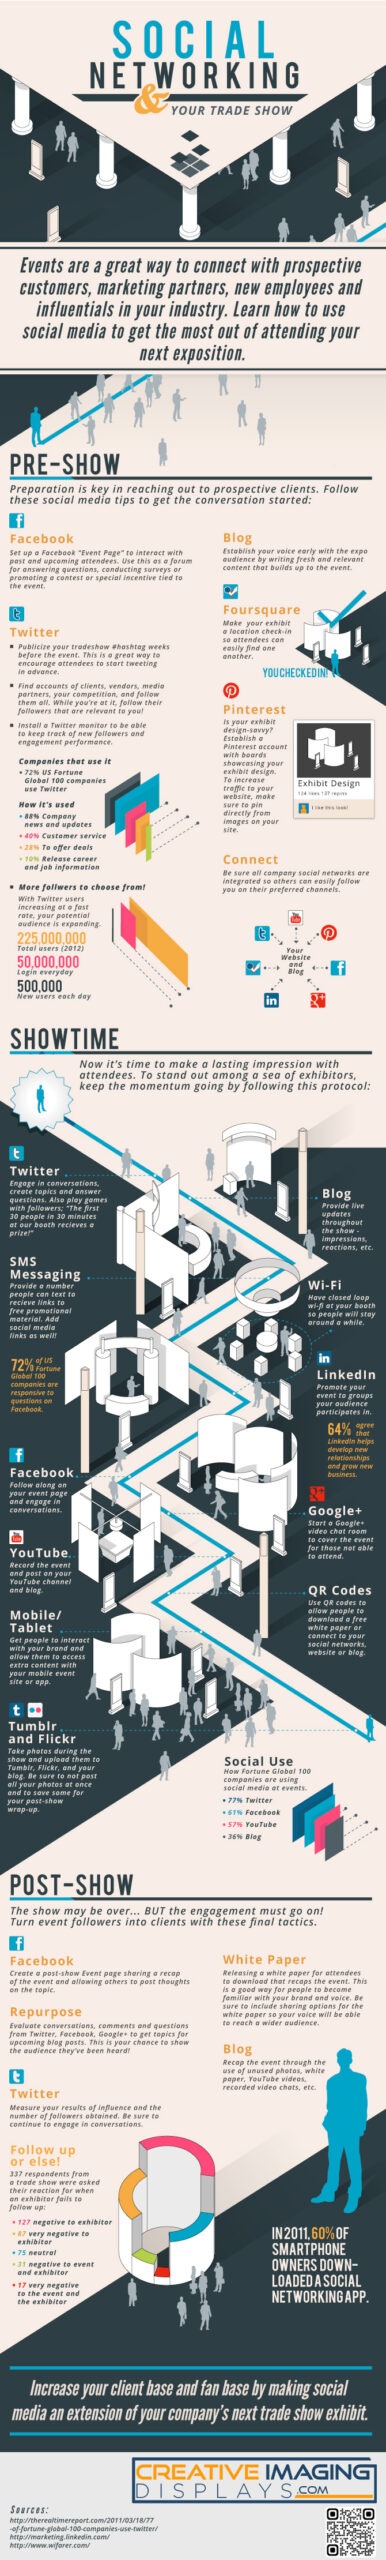 Using Social Networking with Trade Shows - Infographic